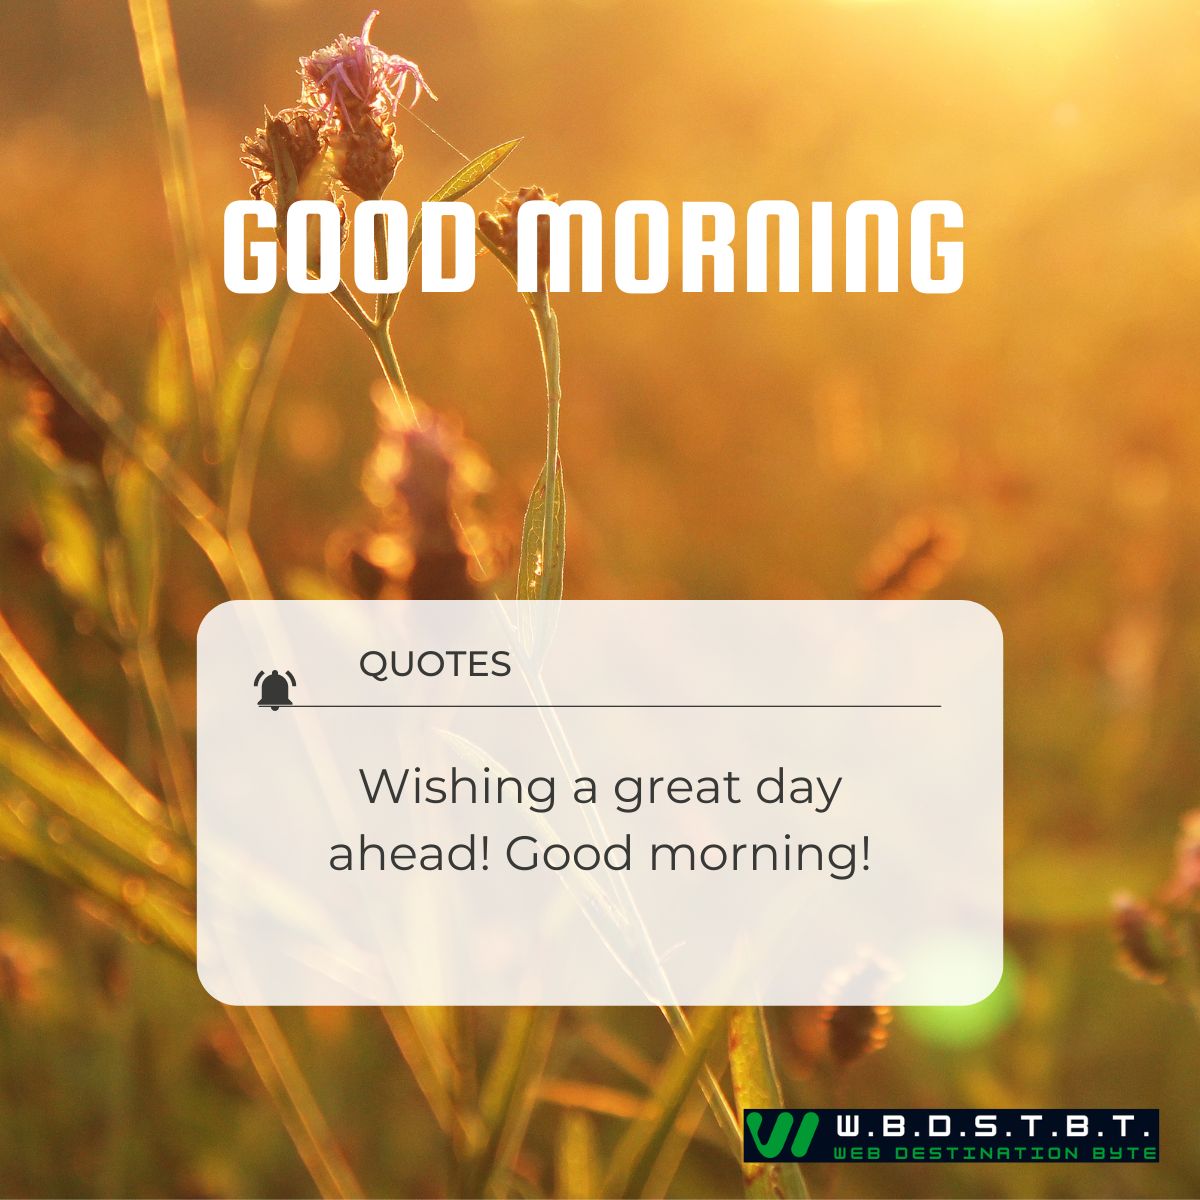 Wishing a great day ahead! Good morning!